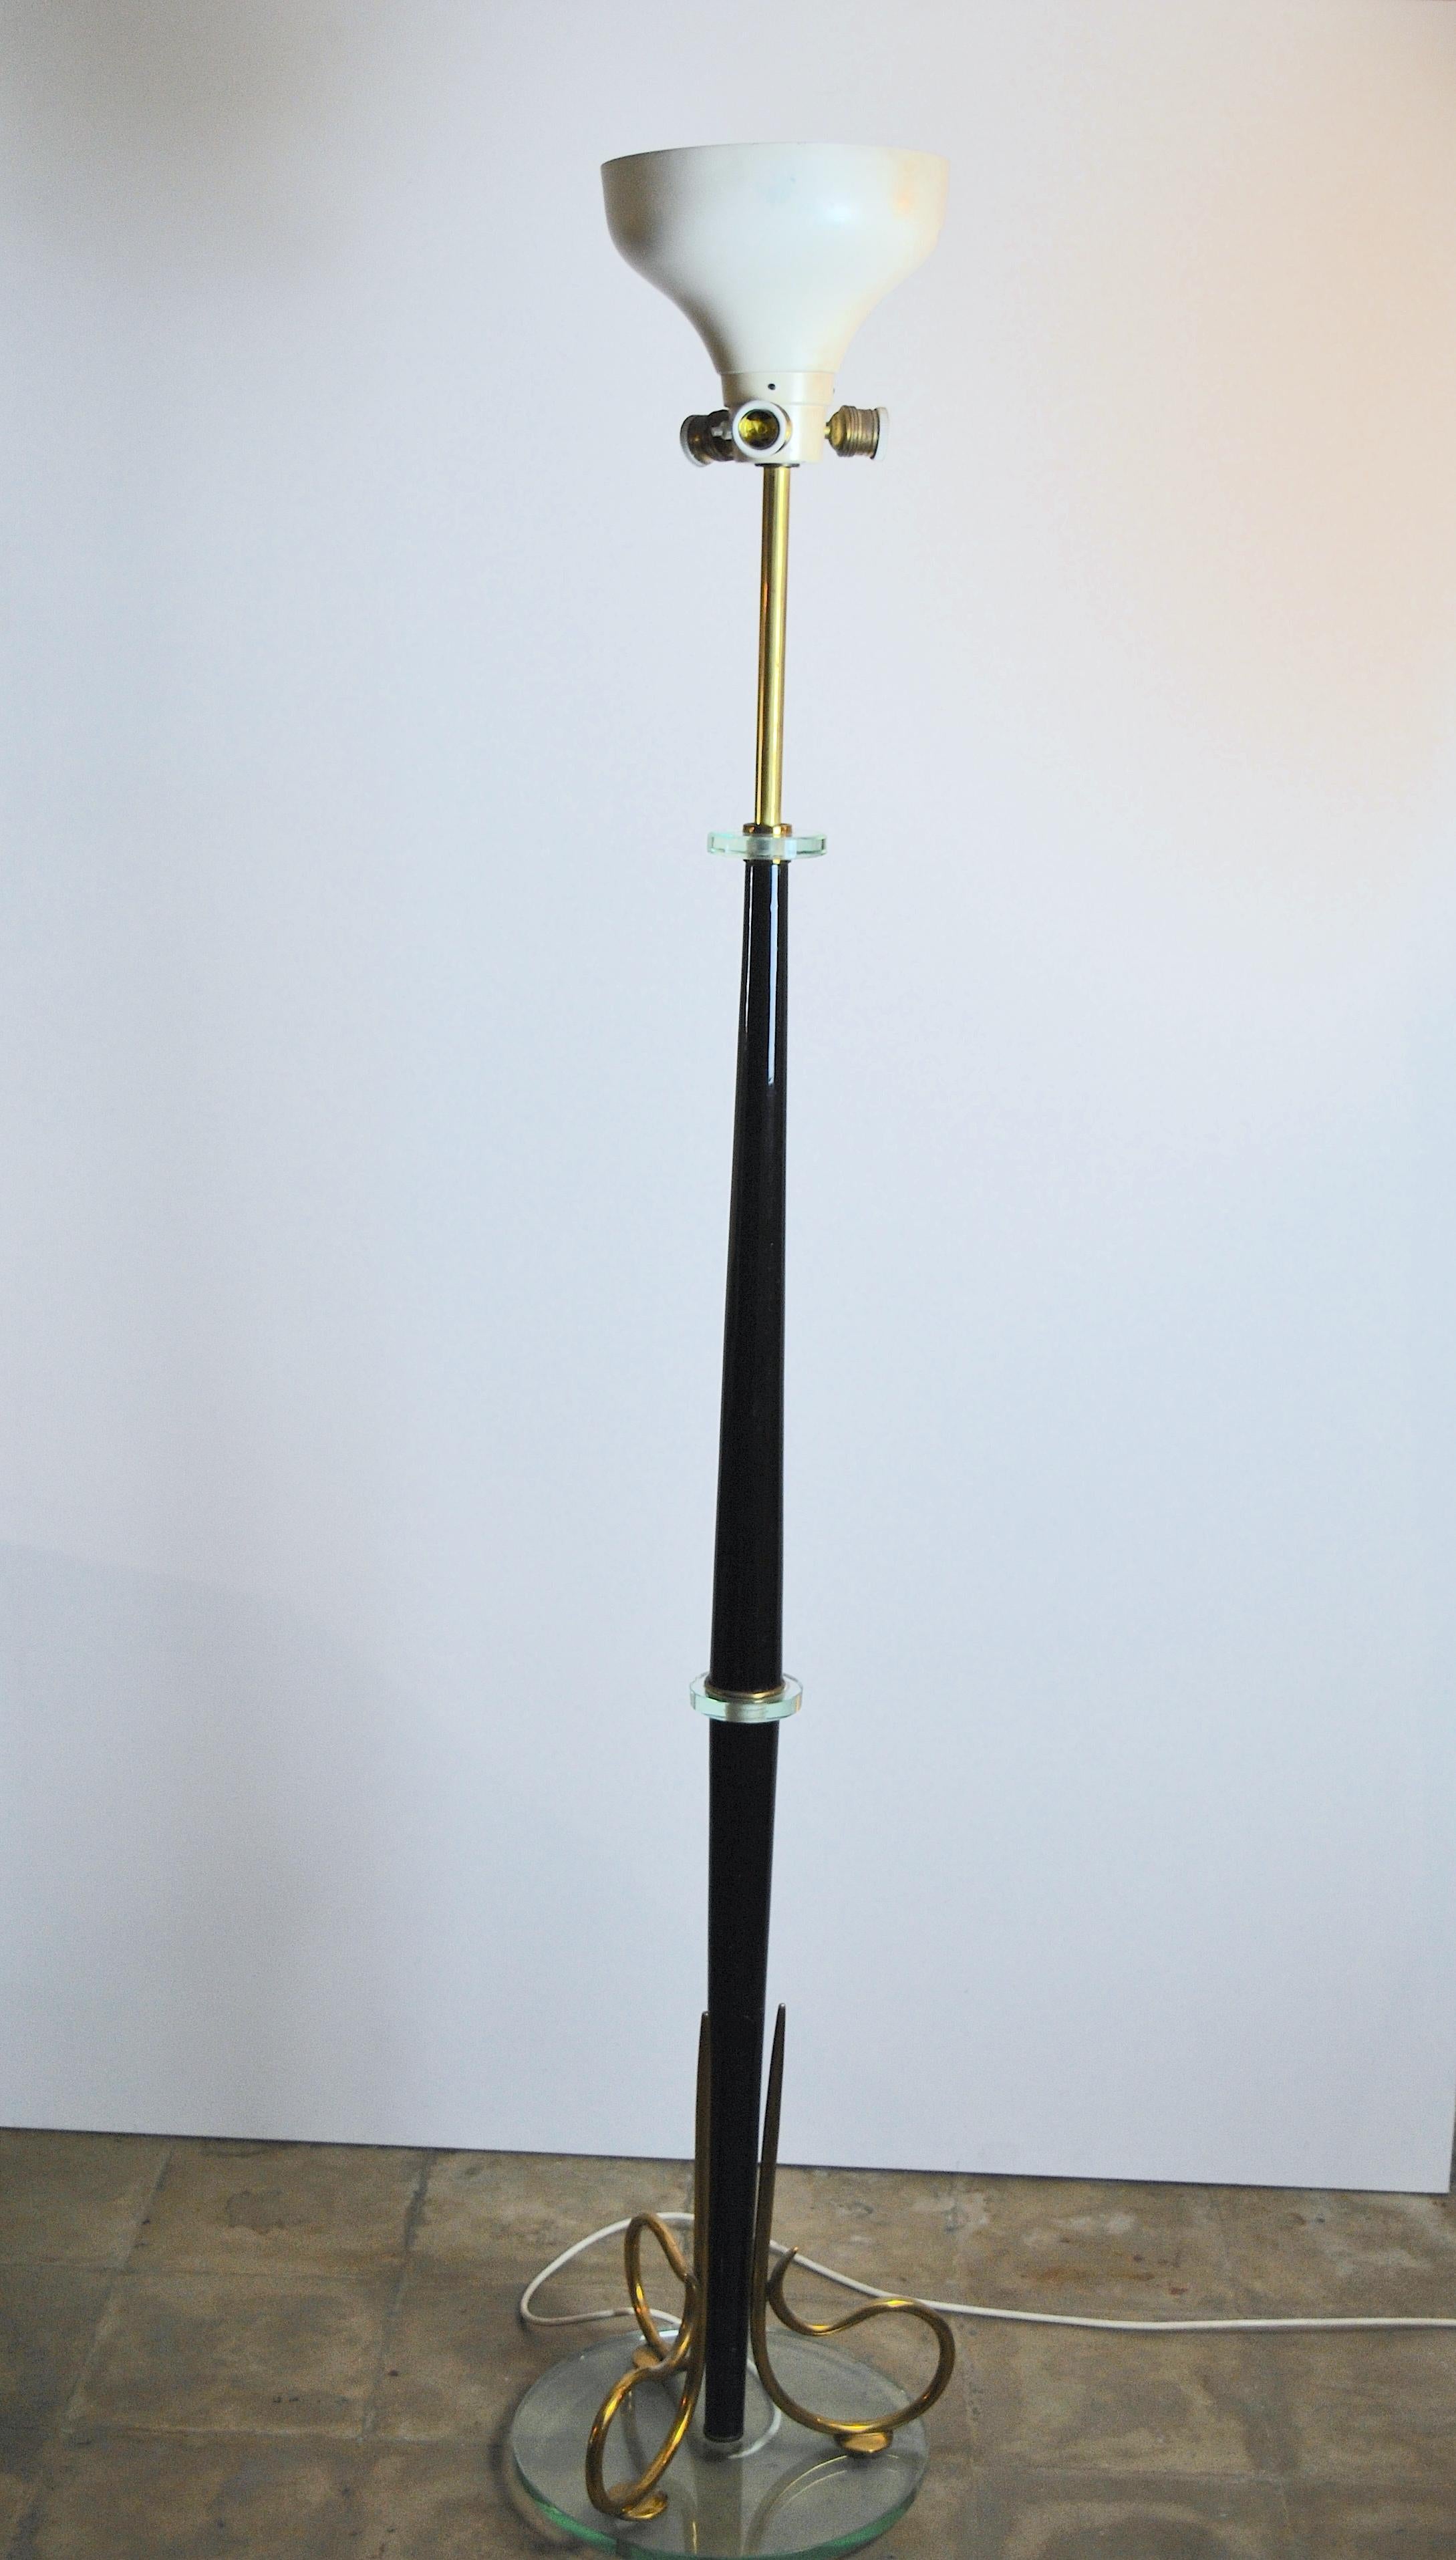 Midcentury Italian floor lamp in the style of Fontana Arte with a glass base and brass finishes, 1950s.